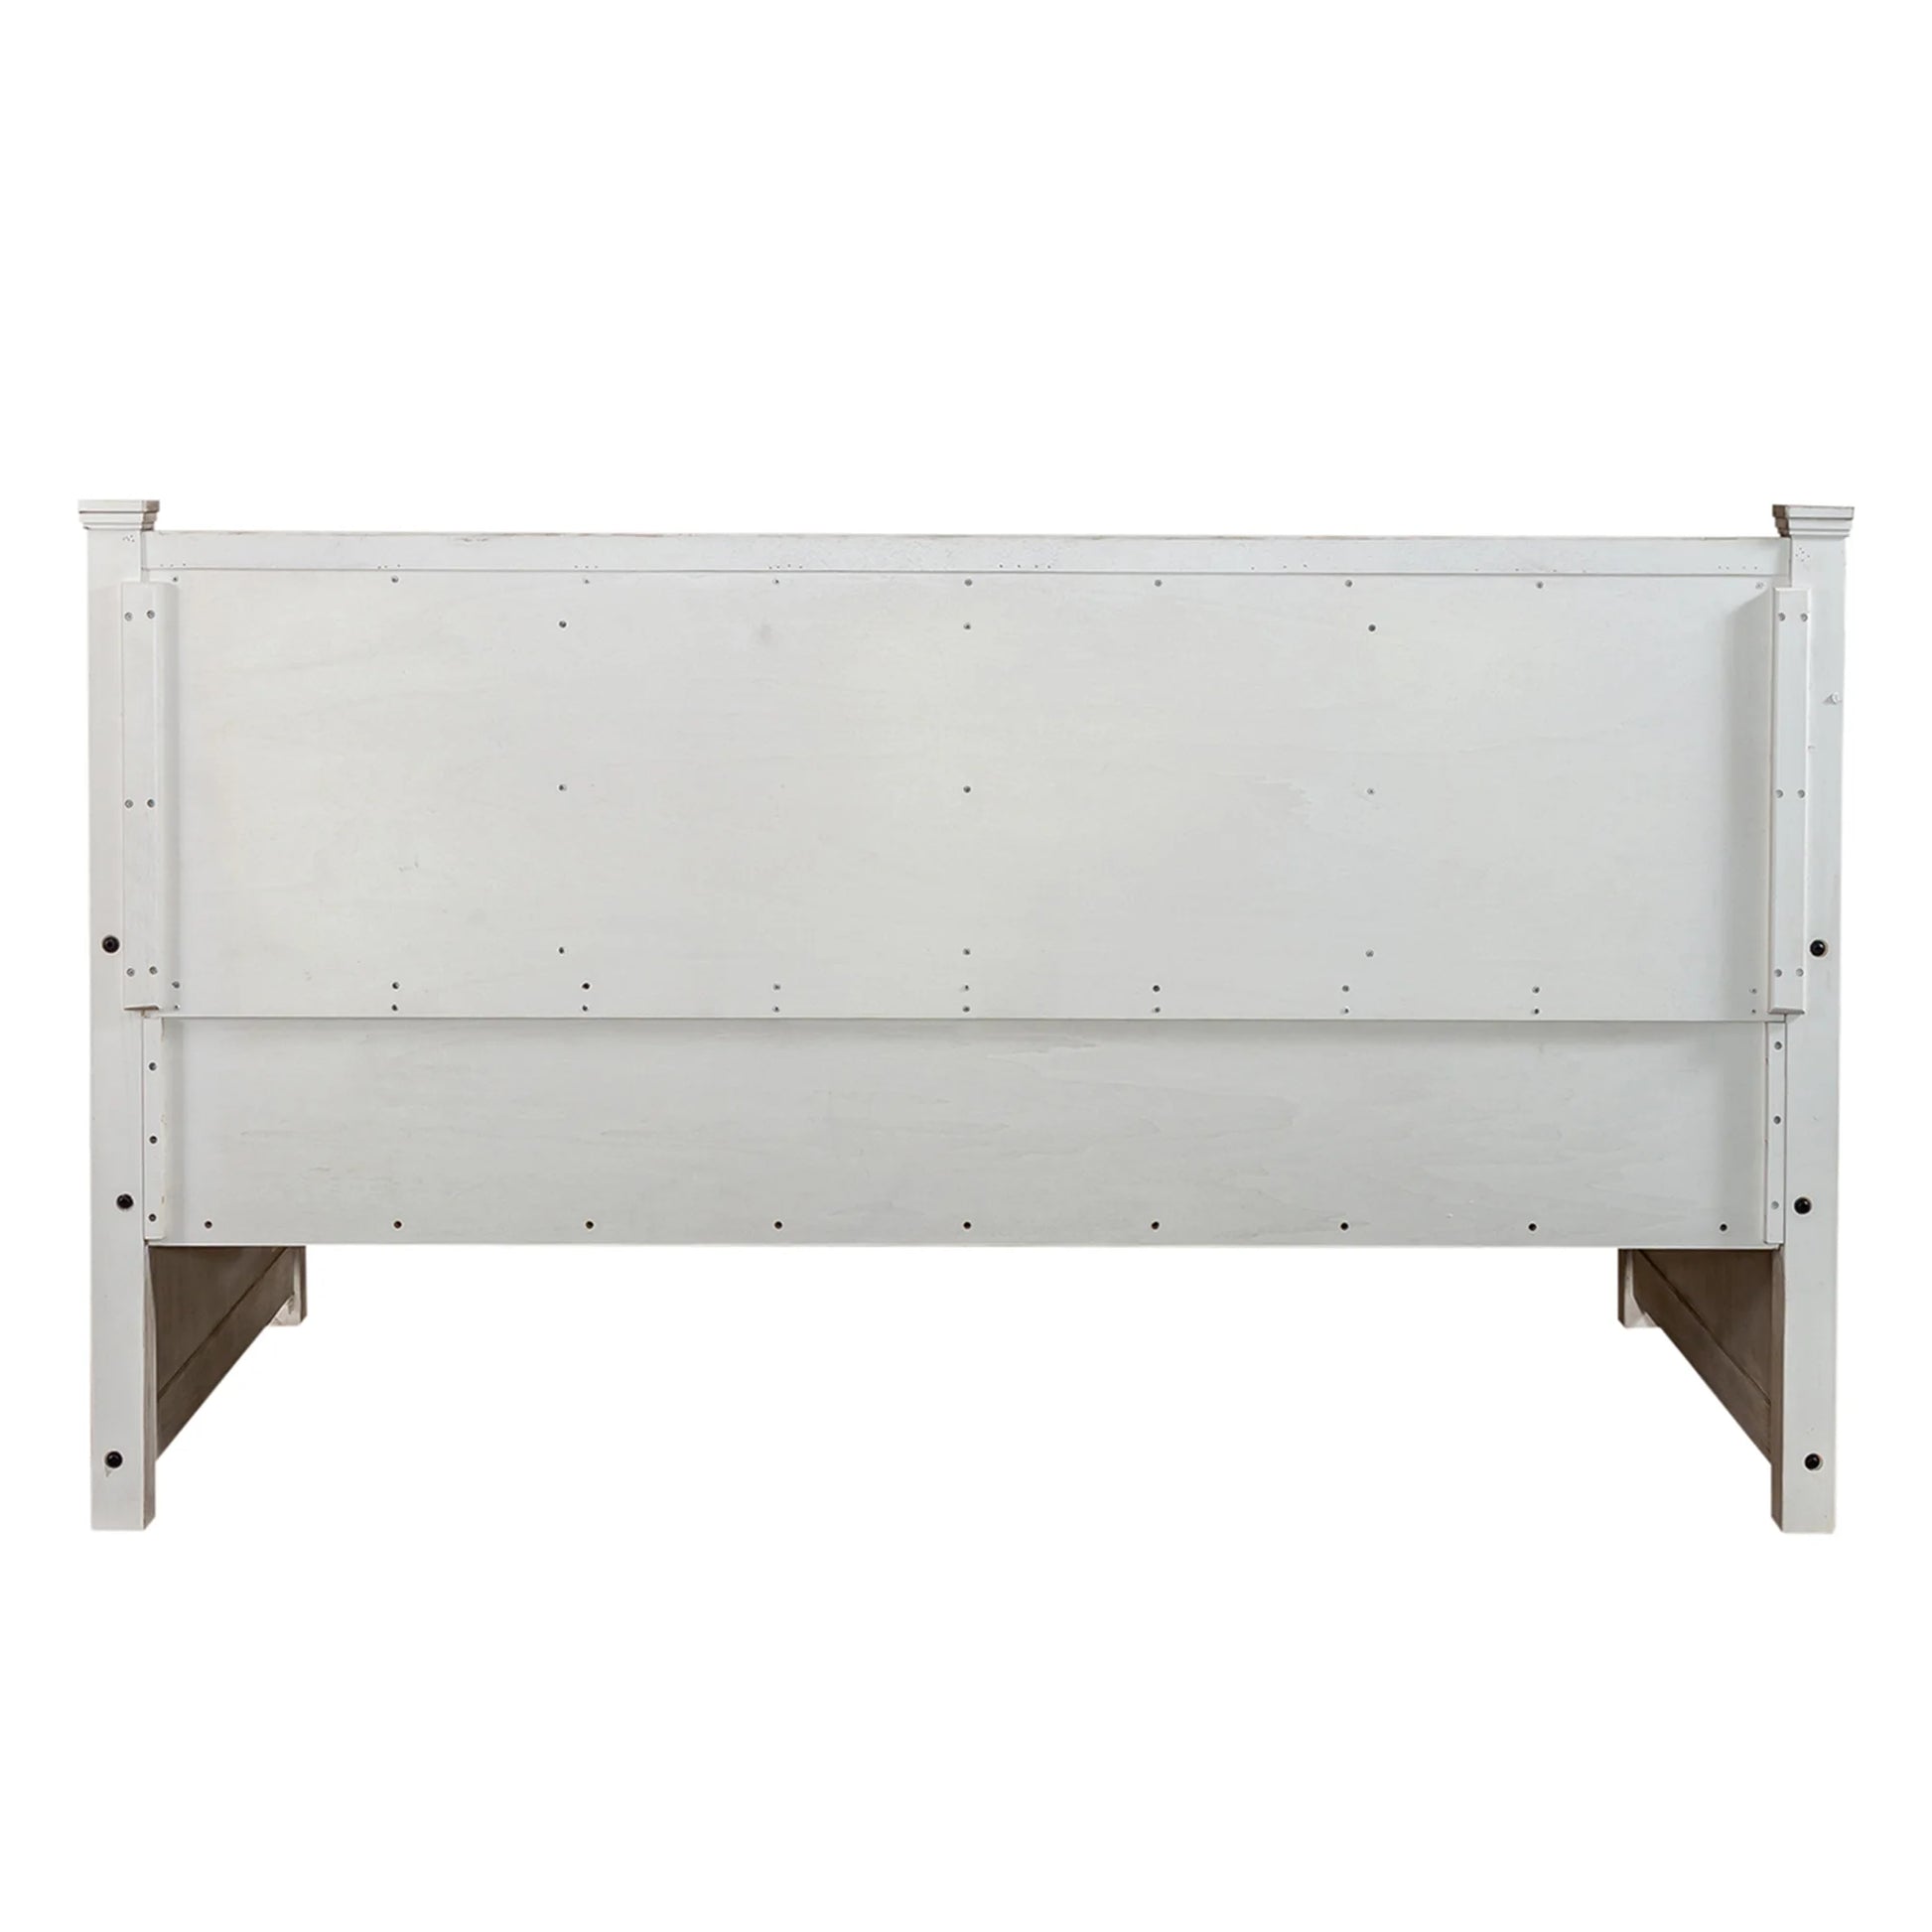 Heartland - Daybed Decorative Back - White 4